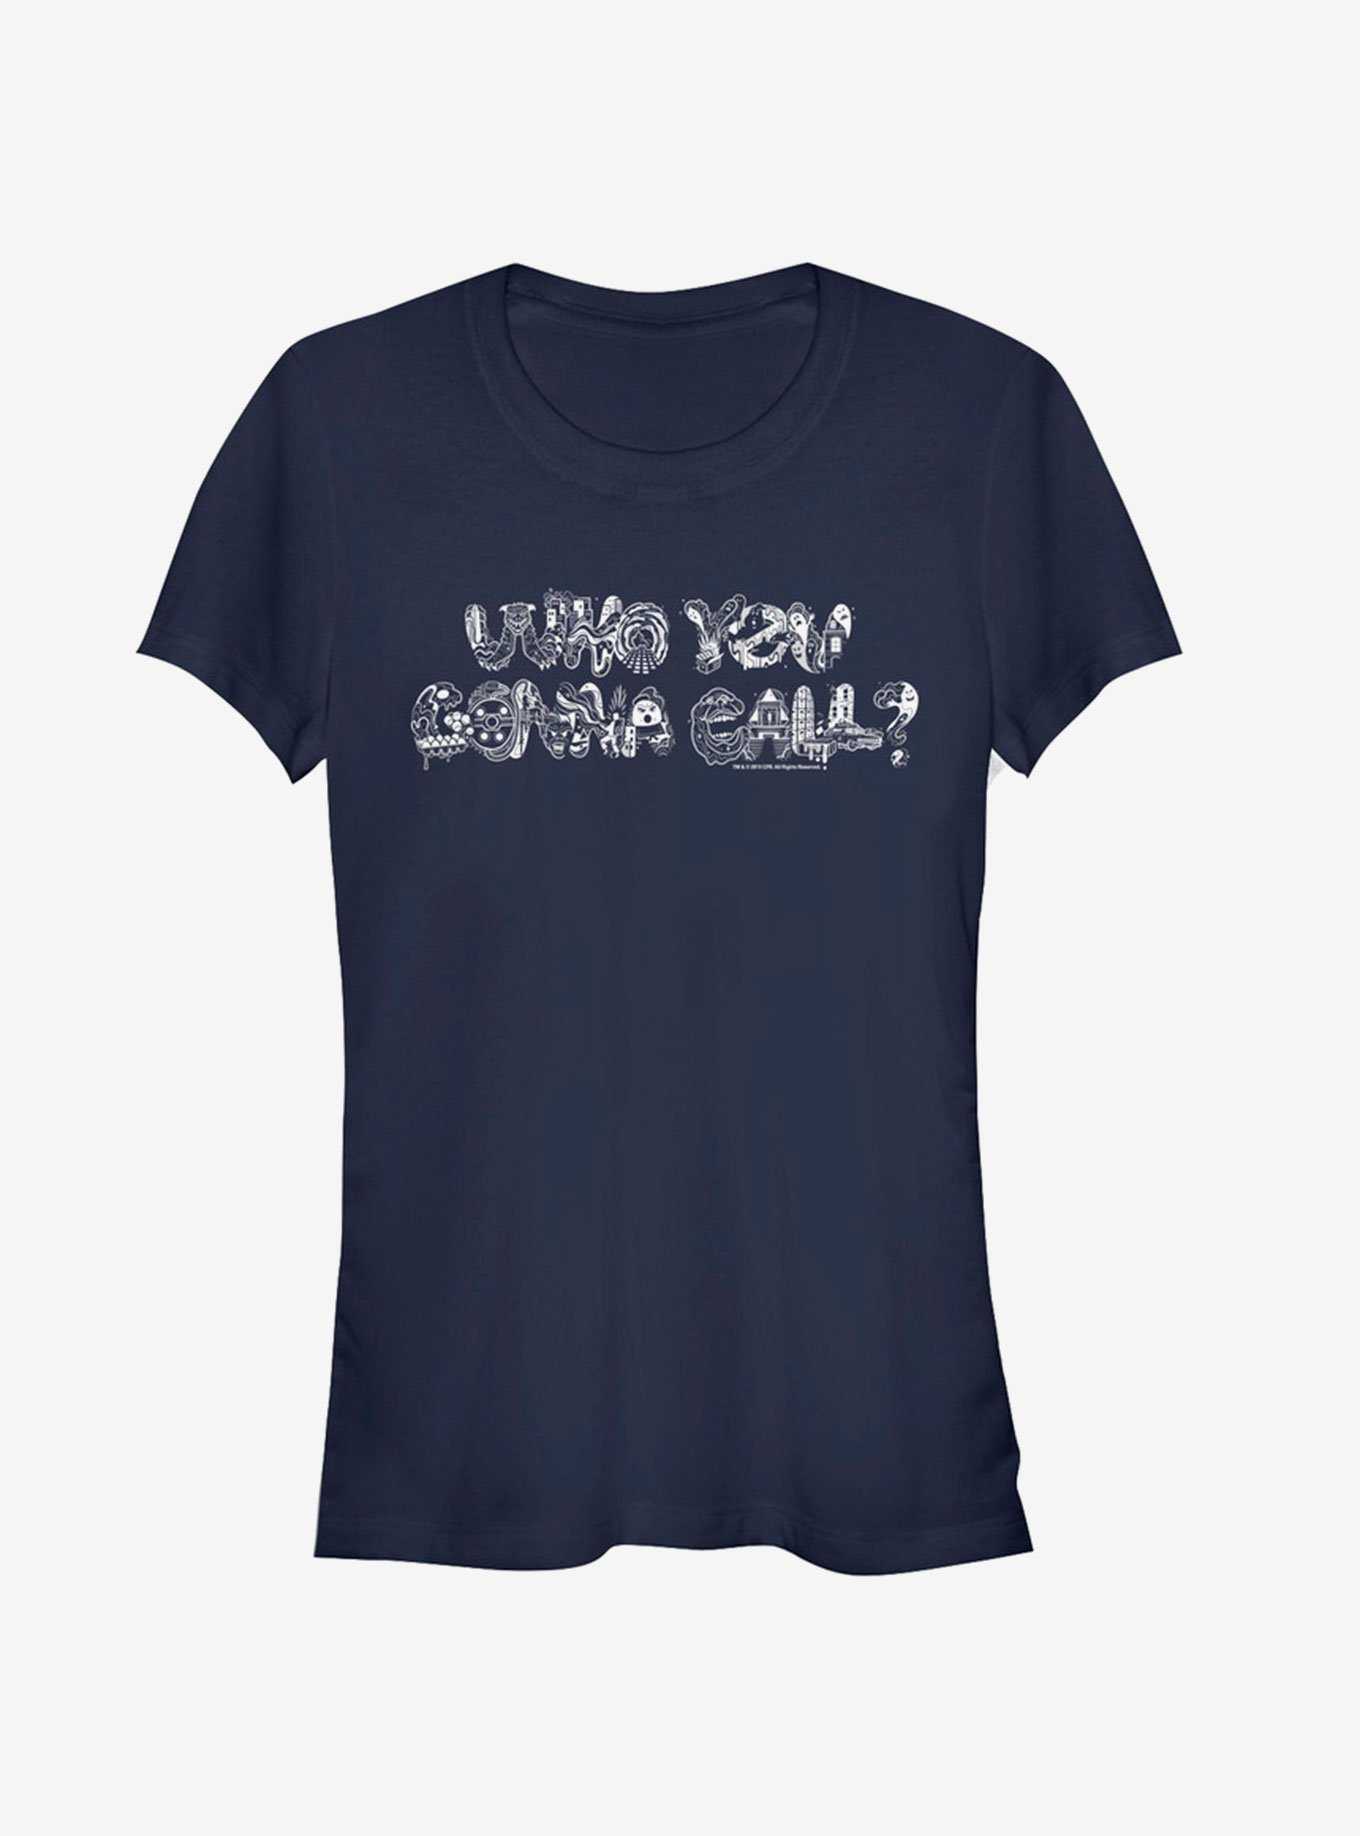 Ghostbusters Gonna Call Doodle Girls T-Shirt, , hi-res